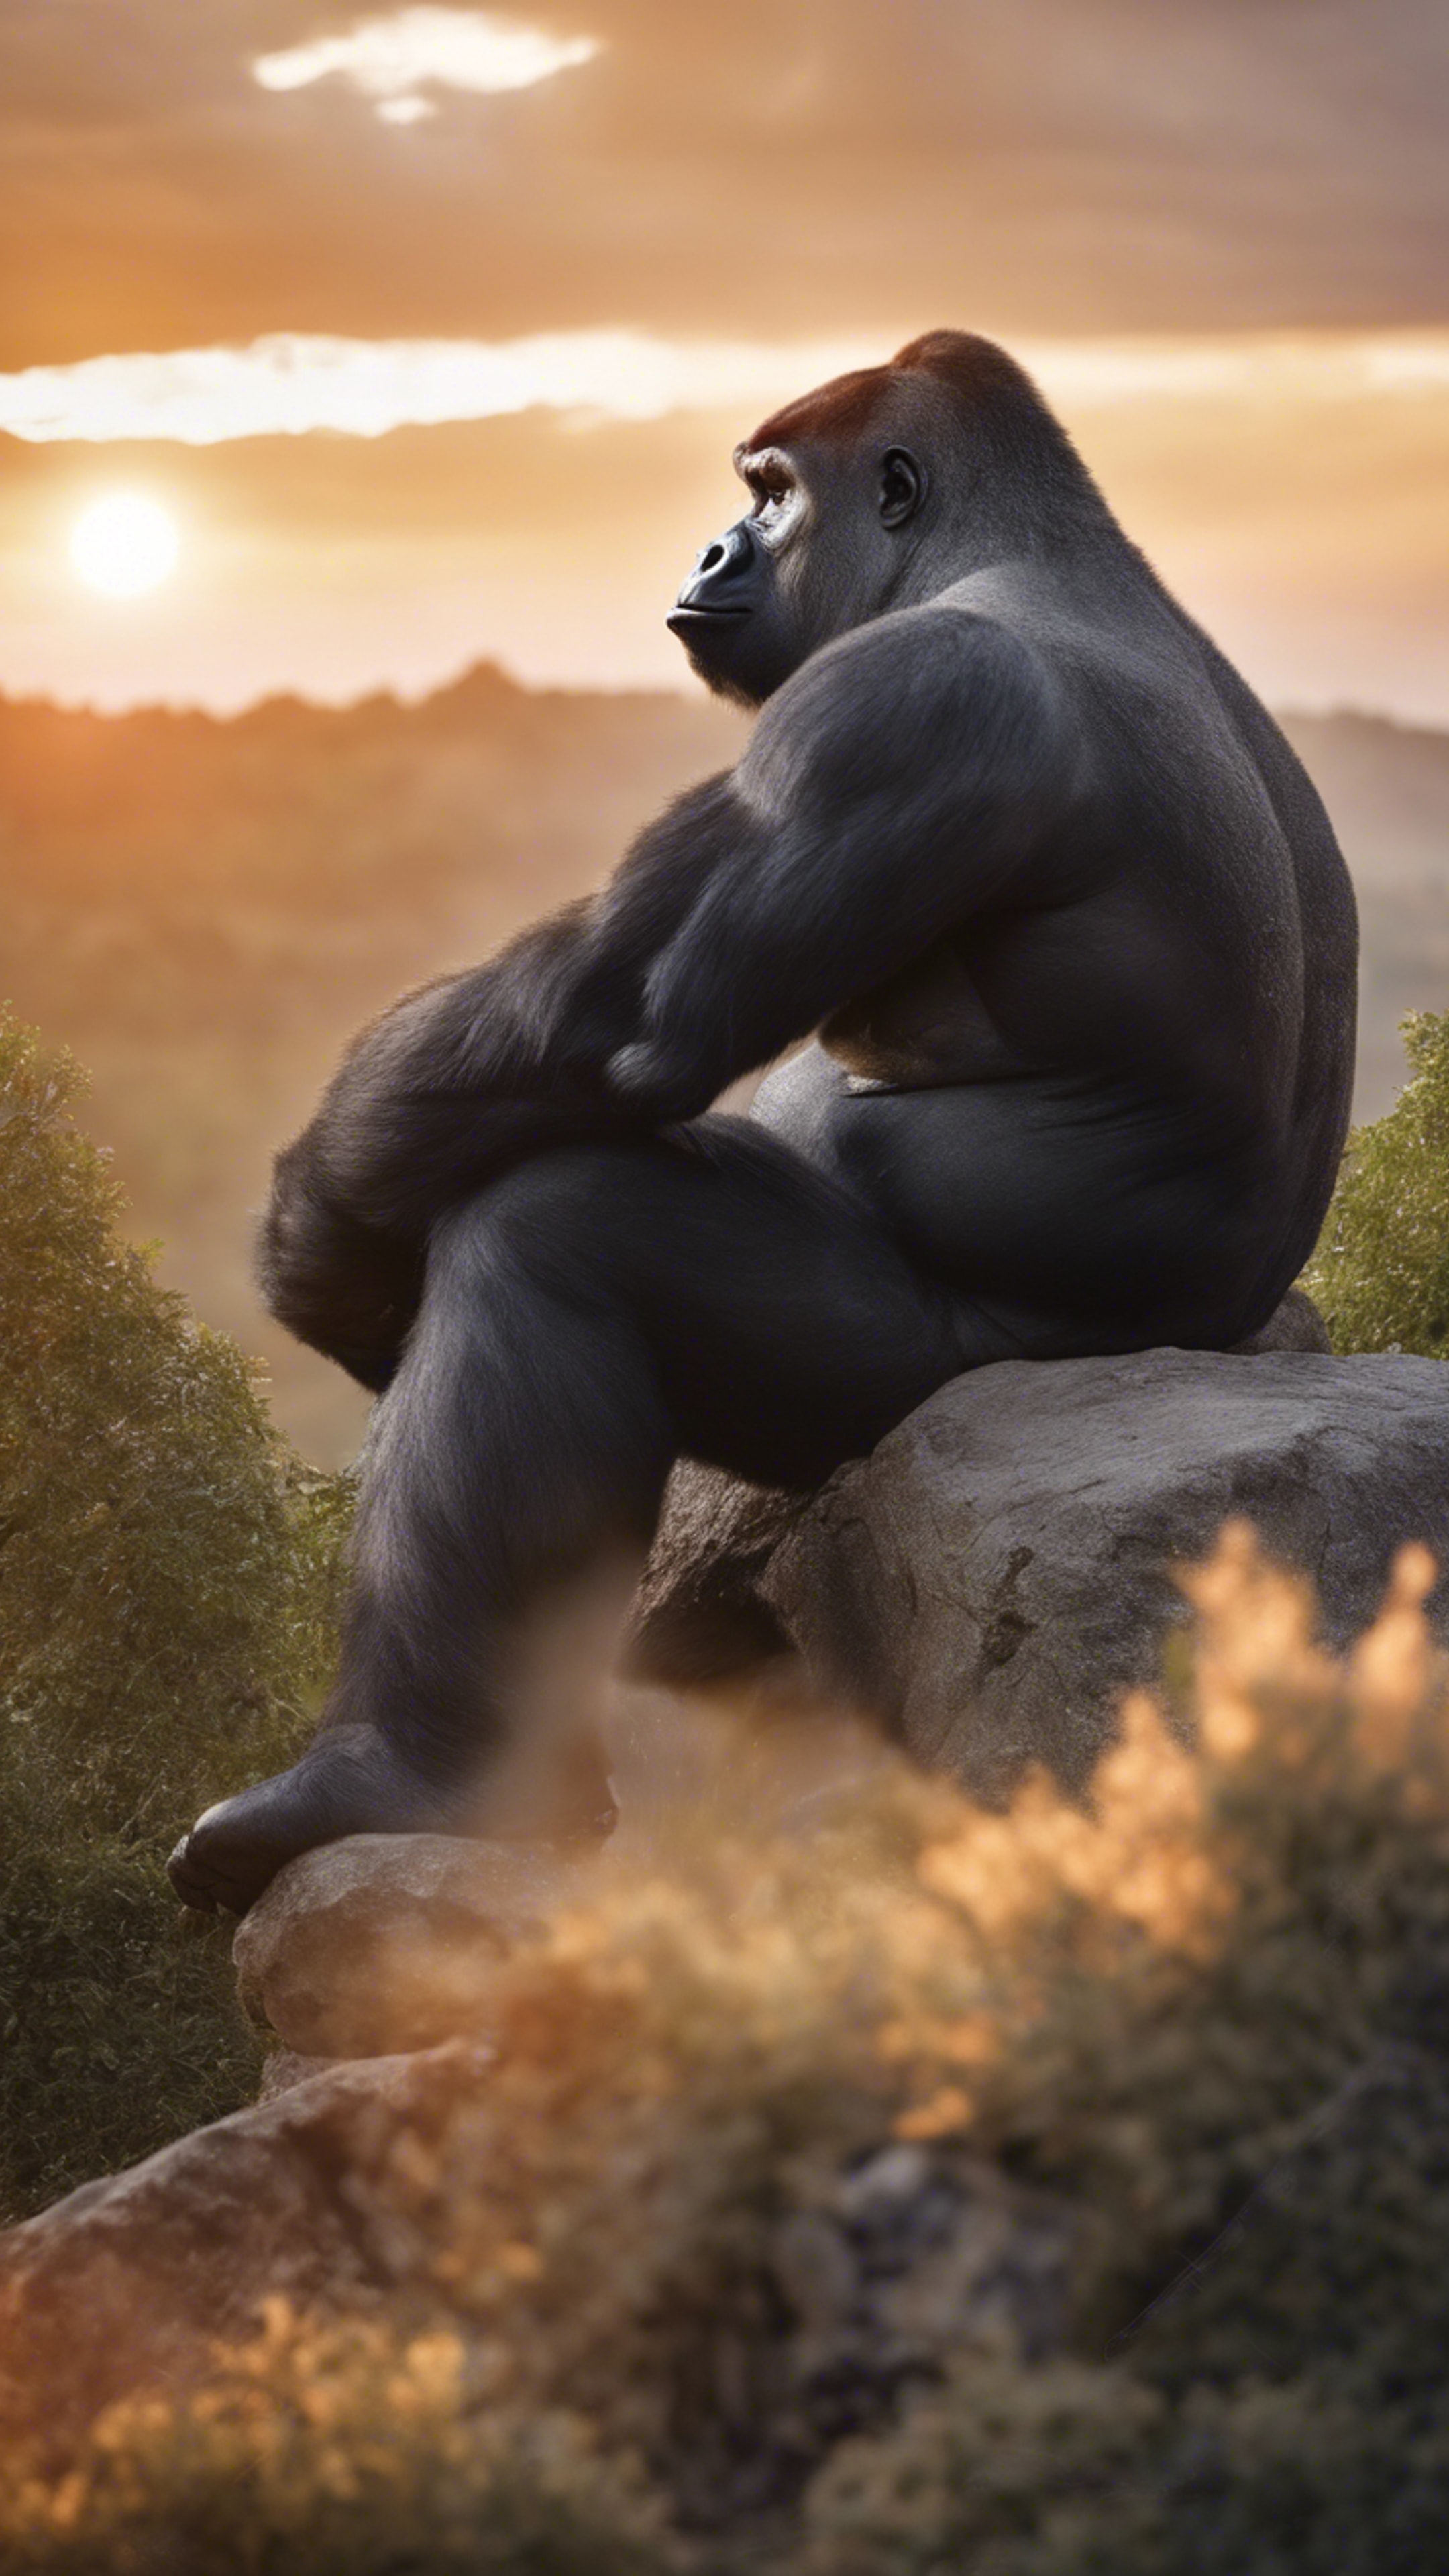 An alpha silverback gorilla majestically sitting on a rocky outcrop with a beautiful sunset backdrop.壁紙[c03c393cd4f24e828f4a]